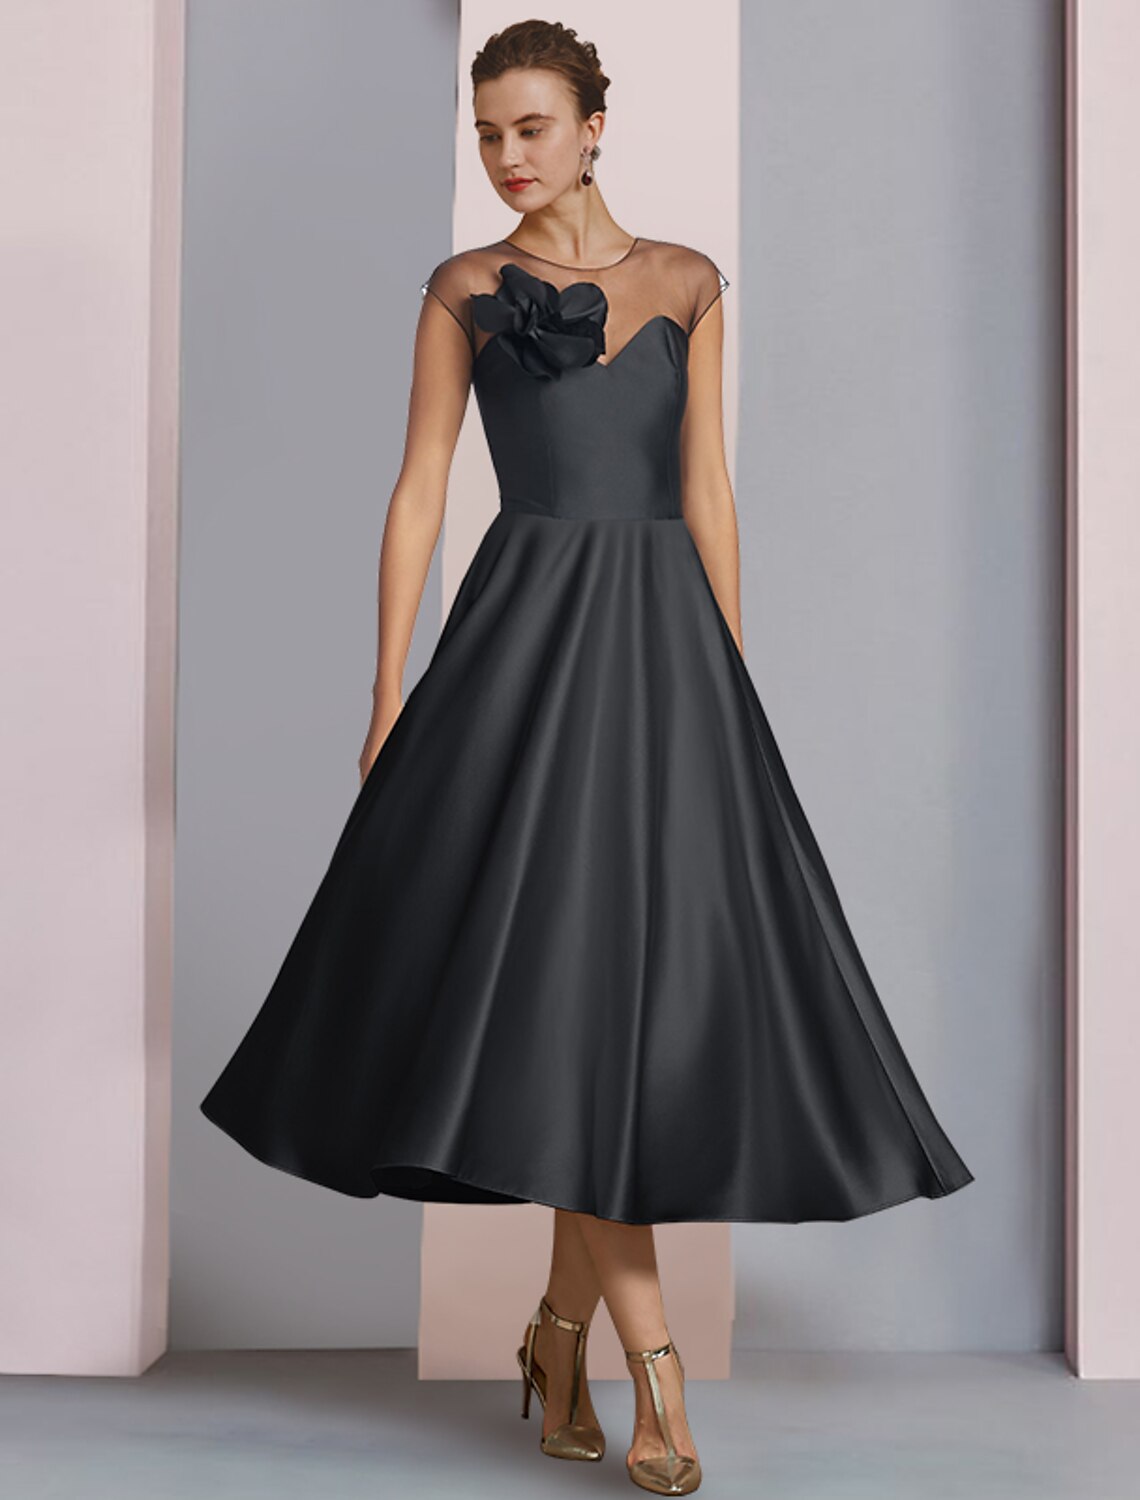 A-Line Mother of the Bride Dress Wedding Guest Elegant Party Scoop Neck Tea Length Satin Half Sleeve with Pleats Flower